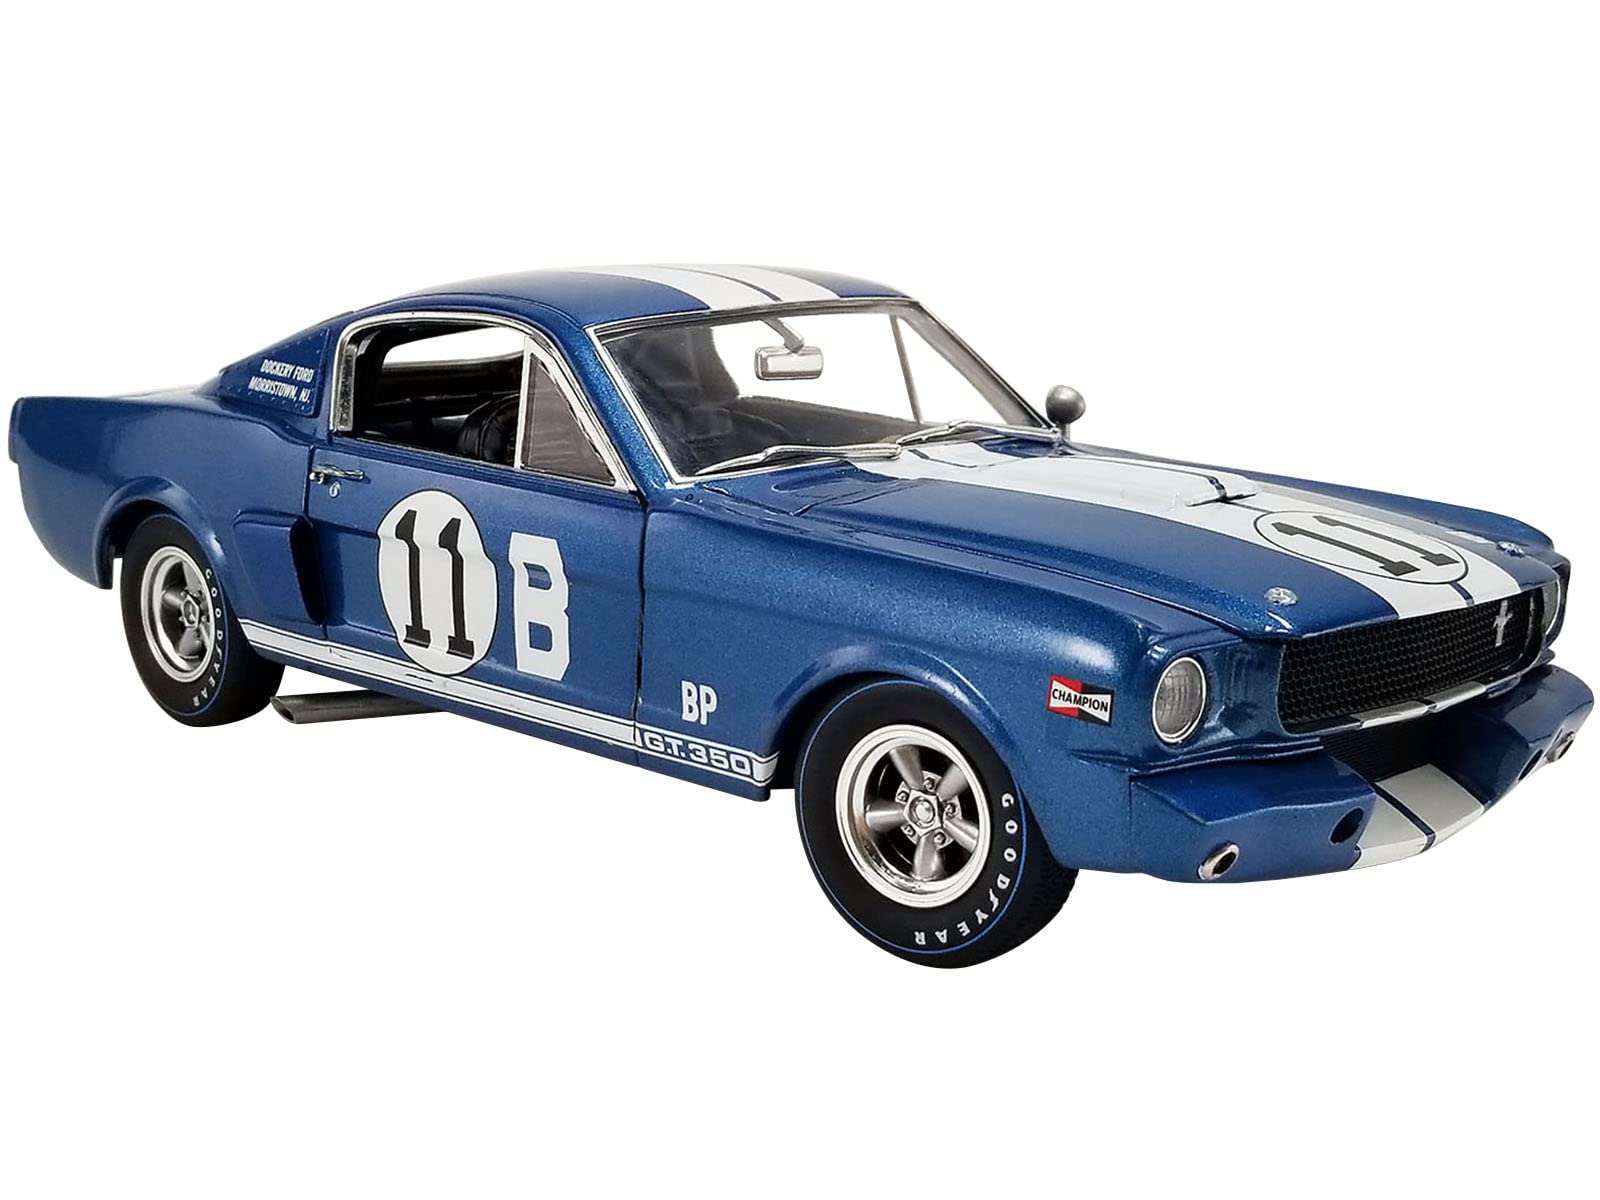 1965 Shelby GT 350R 11B Mark Donahue Blue Metallic with White Stripes Limited Edition to 600 Pieces Worldwide 118 Diecast M